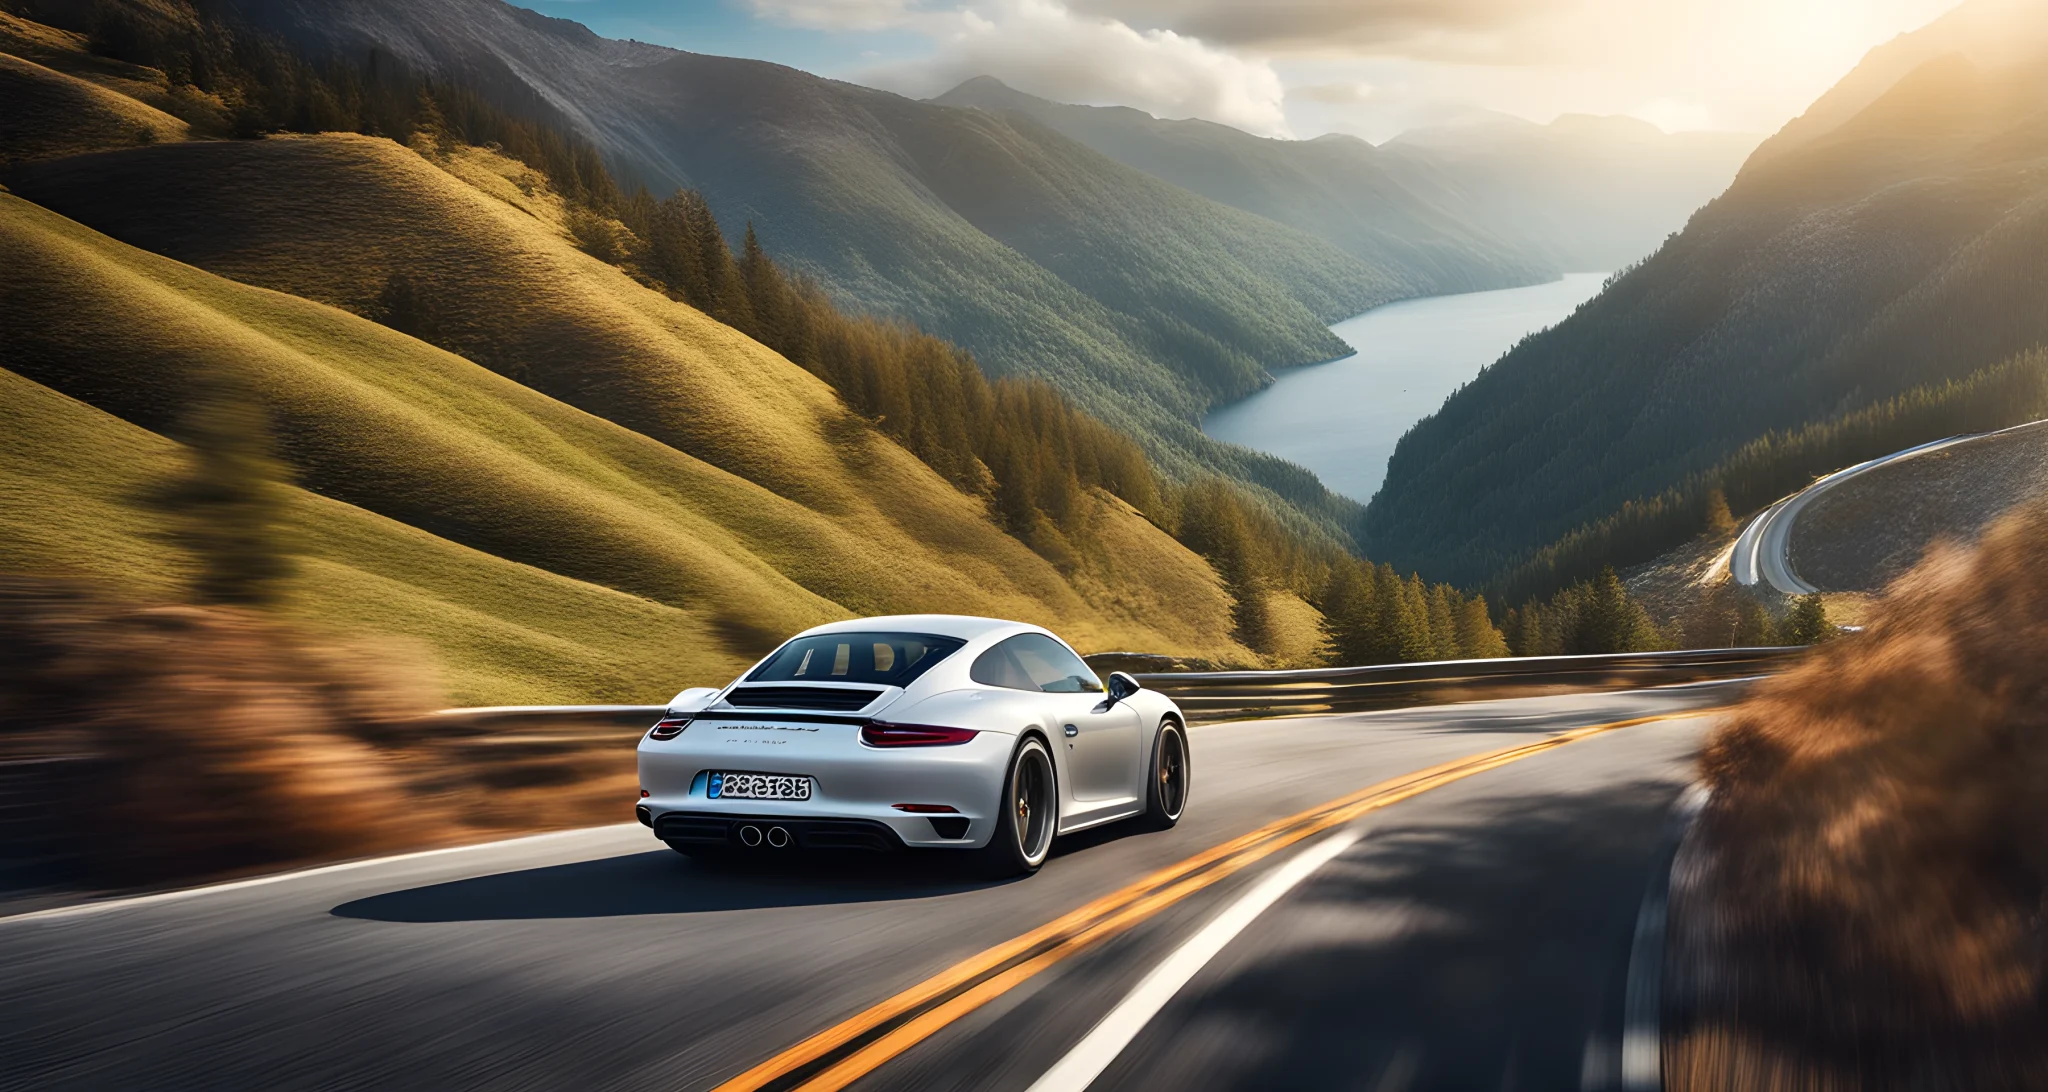 The image features a sleek and iconic Porsche sports car driving through a winding mountain road with breathtaking scenic views.